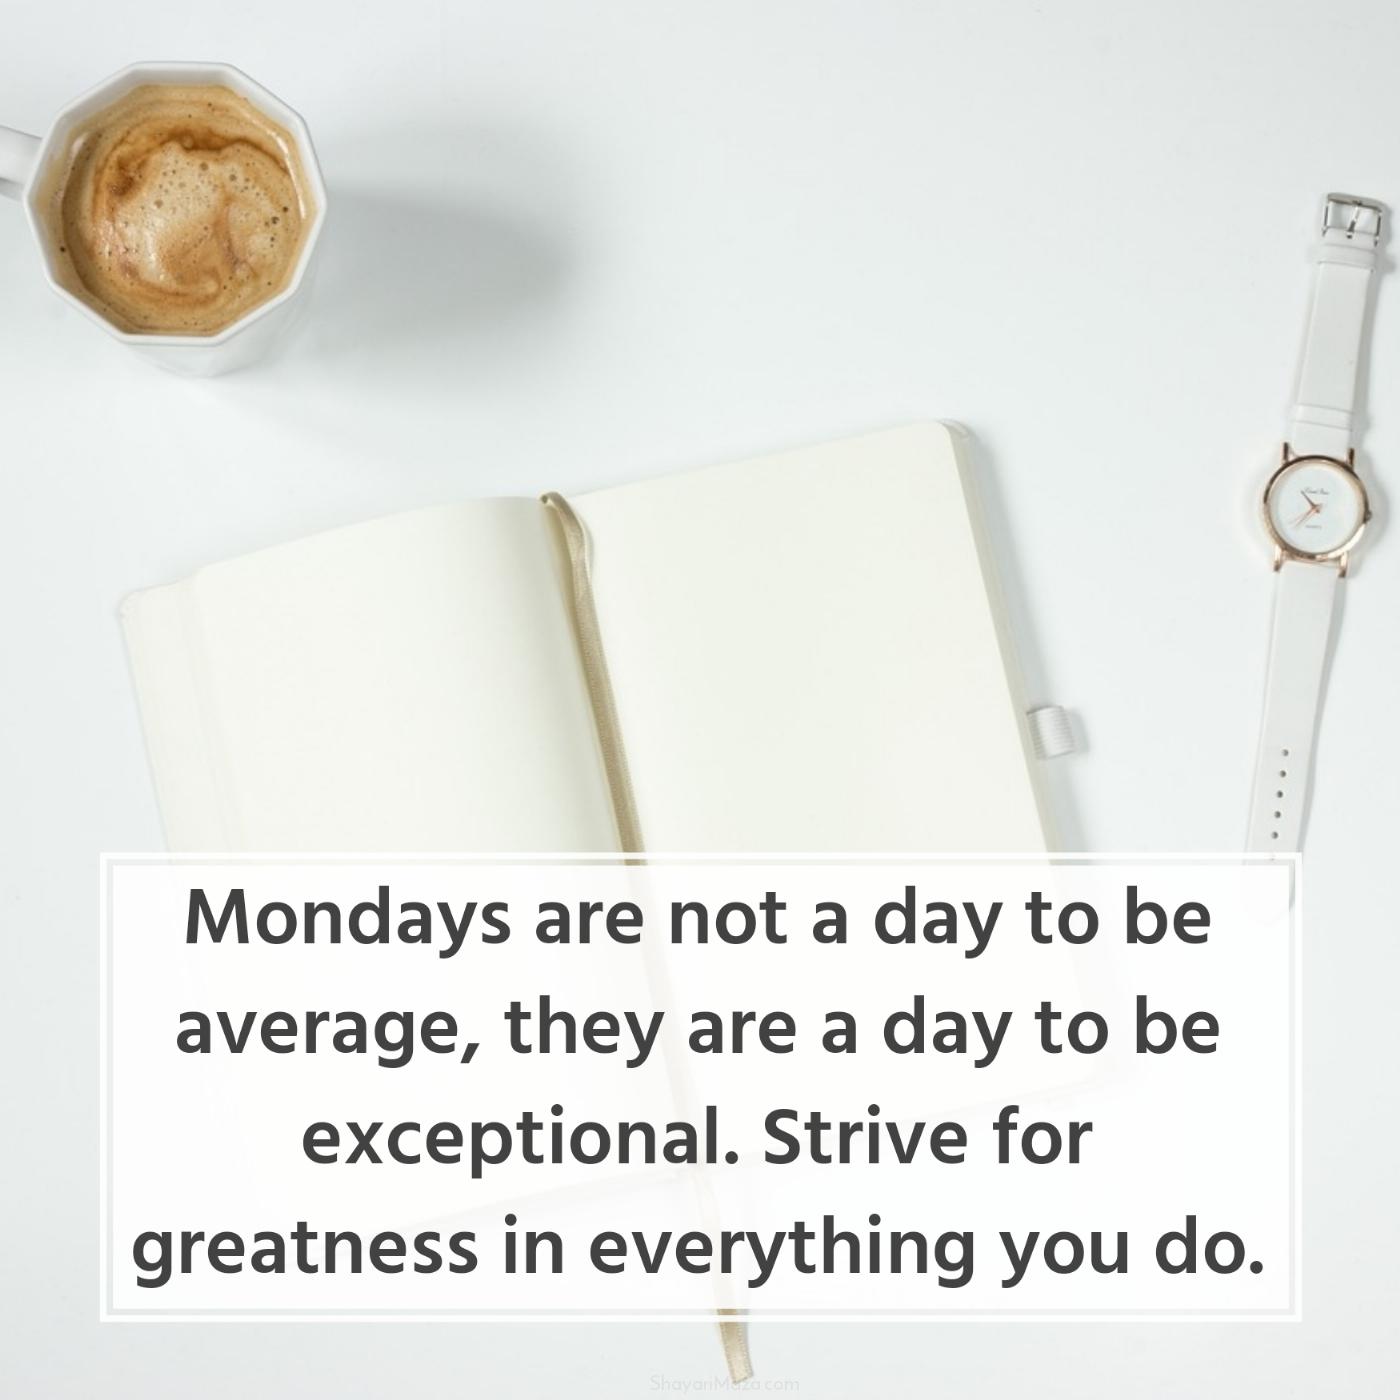 Mondays are not a day to be average